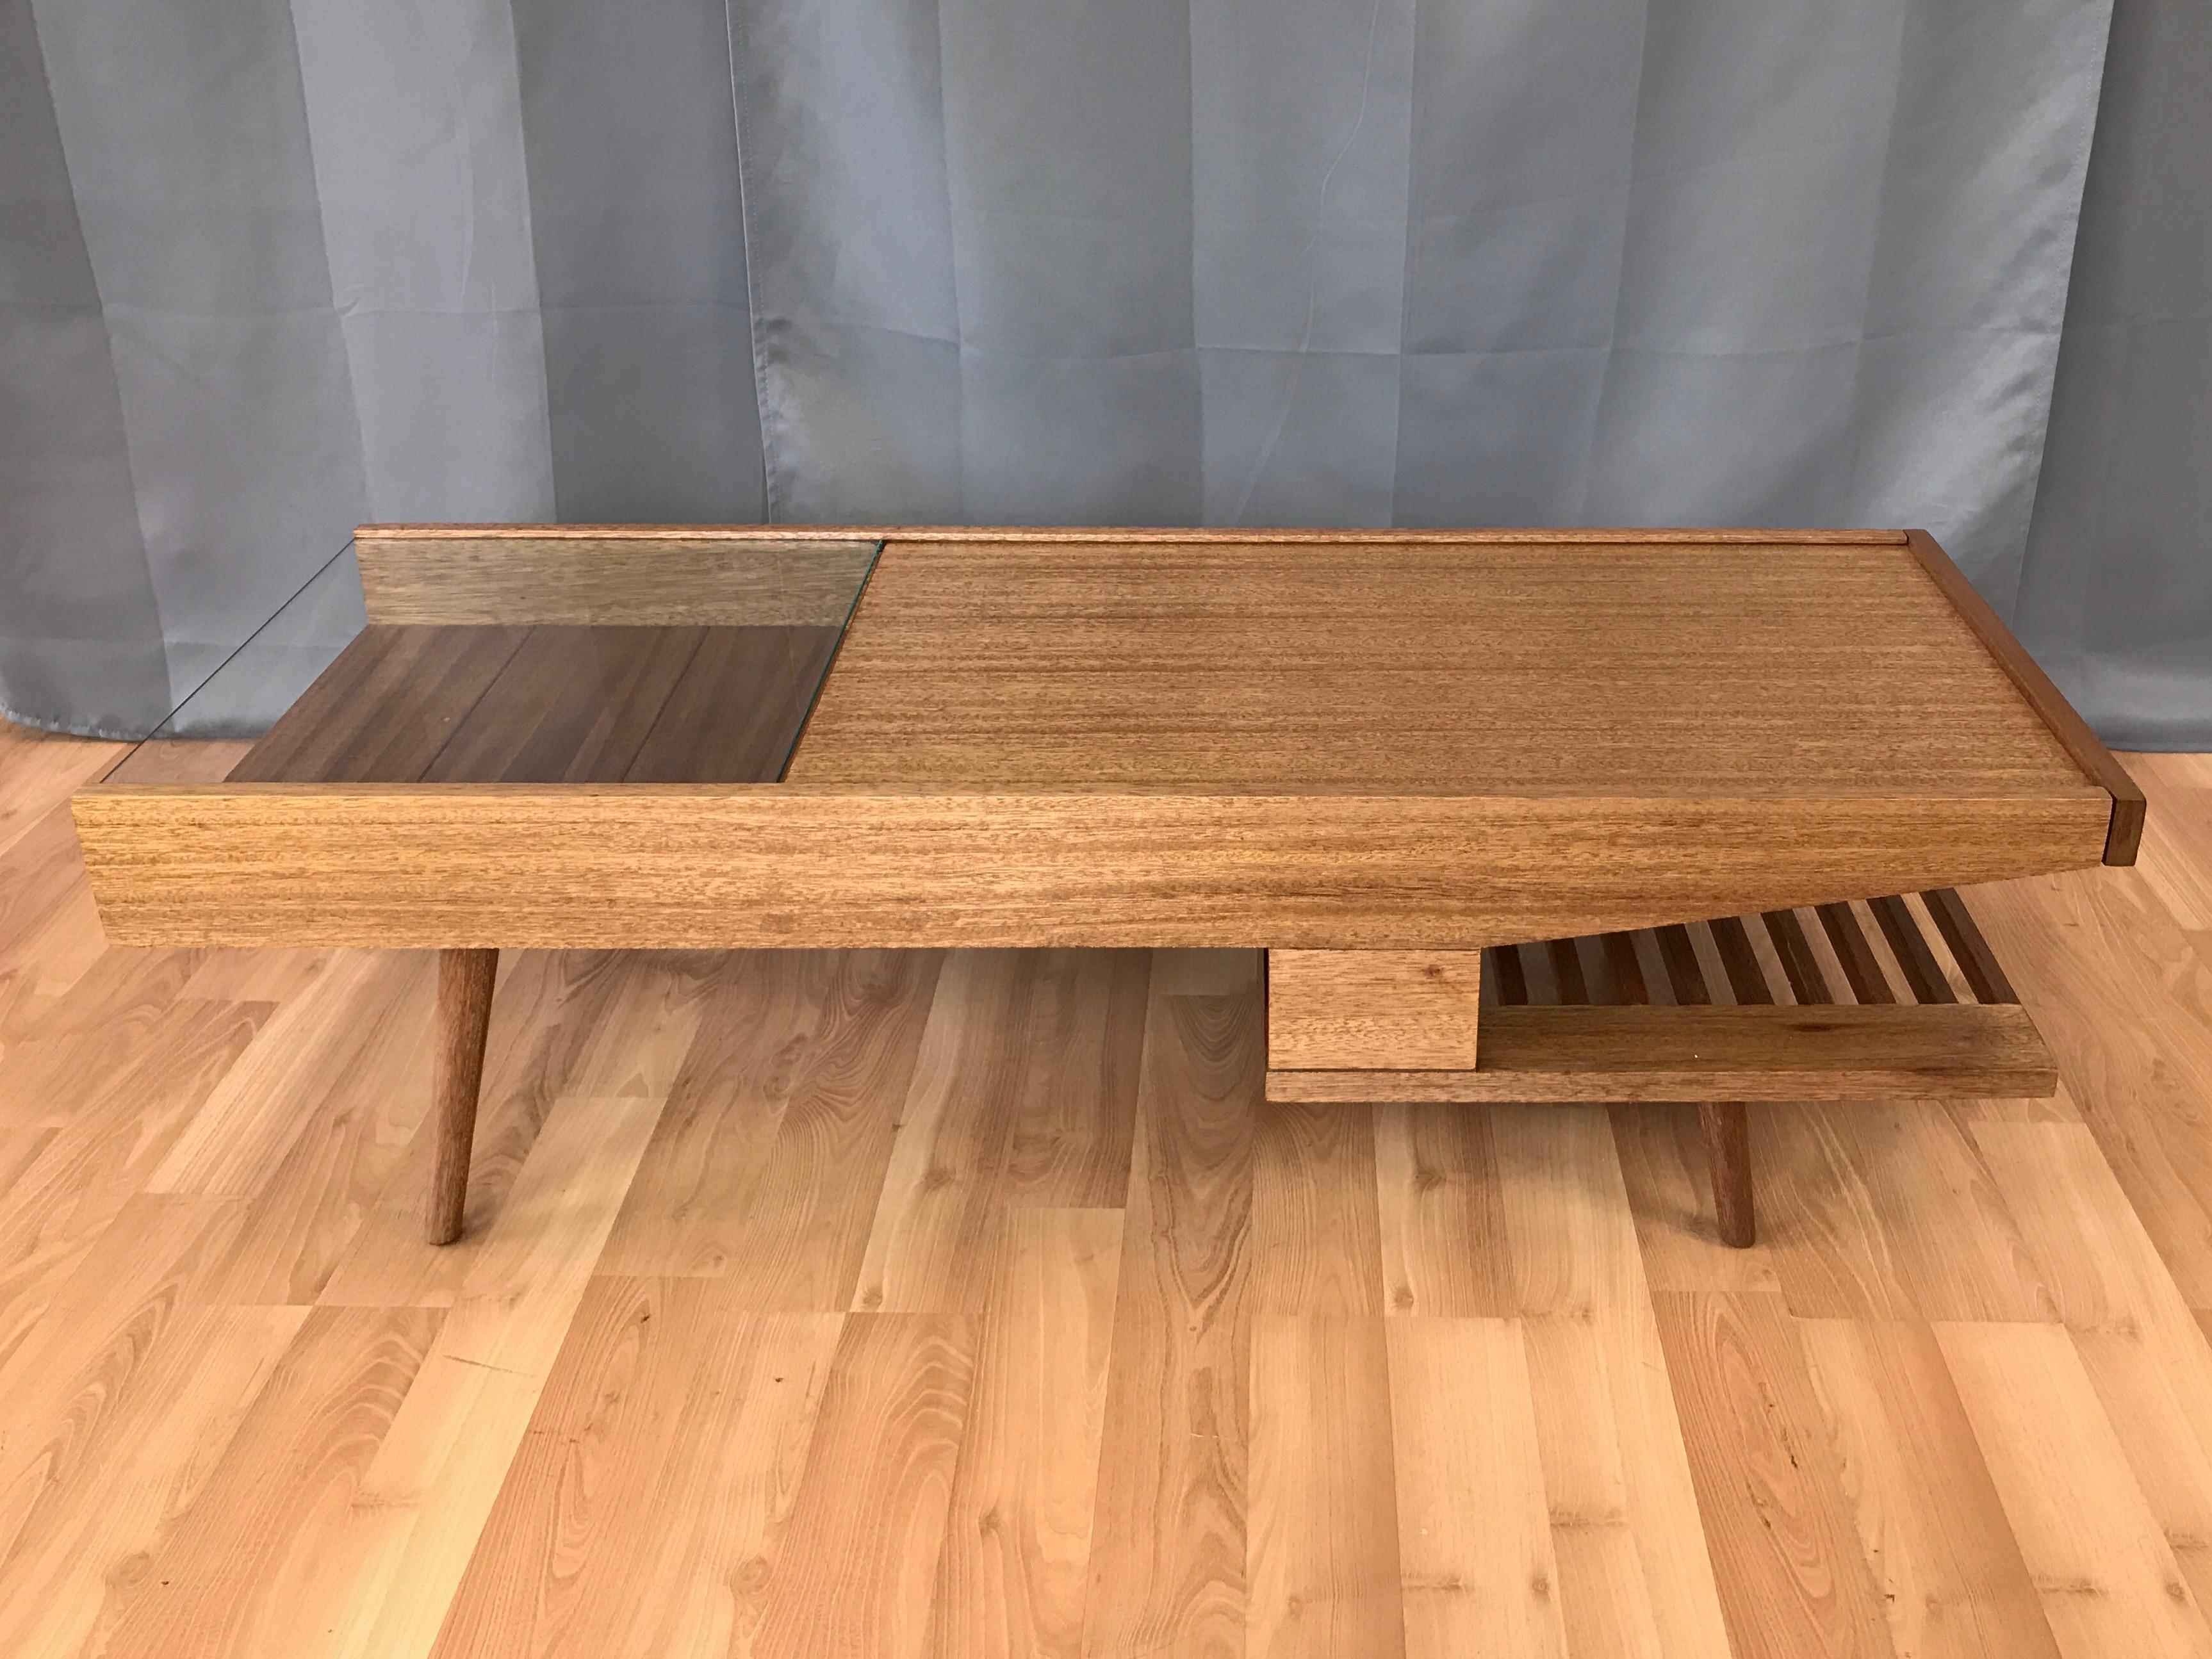 A fantastic and rare Mid-Century Modern mahogany and glass coffee table with concealed laminate serving surface and built-in warming plate by John Keal for Brown-Saltman.

Gorgeously grained golden ribbon mahogany with wood and glass top, open